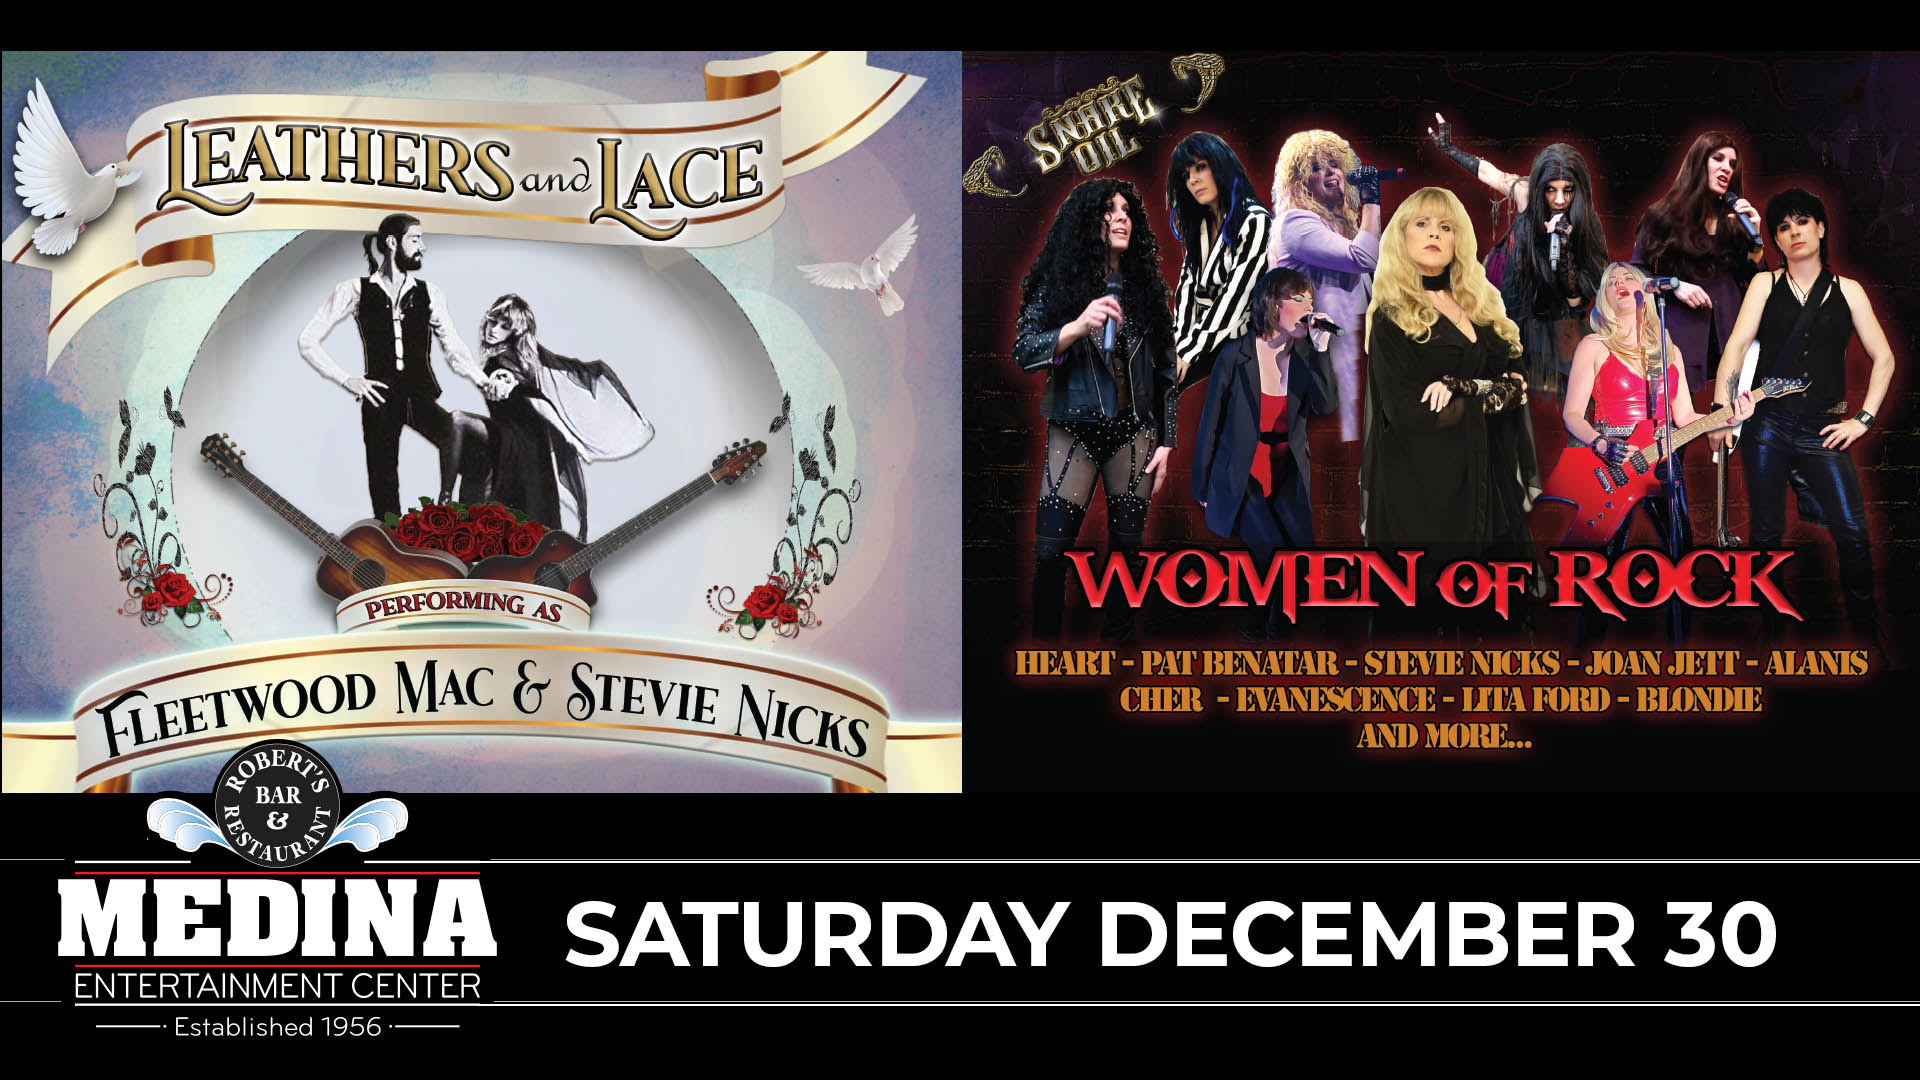 Leathers & Lace: A Tribute To Fleetwood Mac + The Women Of Rock Medina Entertainment Center Saturday, December 30, 2023 Doors: 7:00PM | Music: 8:00PM | 21+ Tickets on-sale Friday, September 15 at 11am Tickets: $30 (Gold Seating), $25 (Silver Seating) & $20 (GA Seating) plus applicable fees